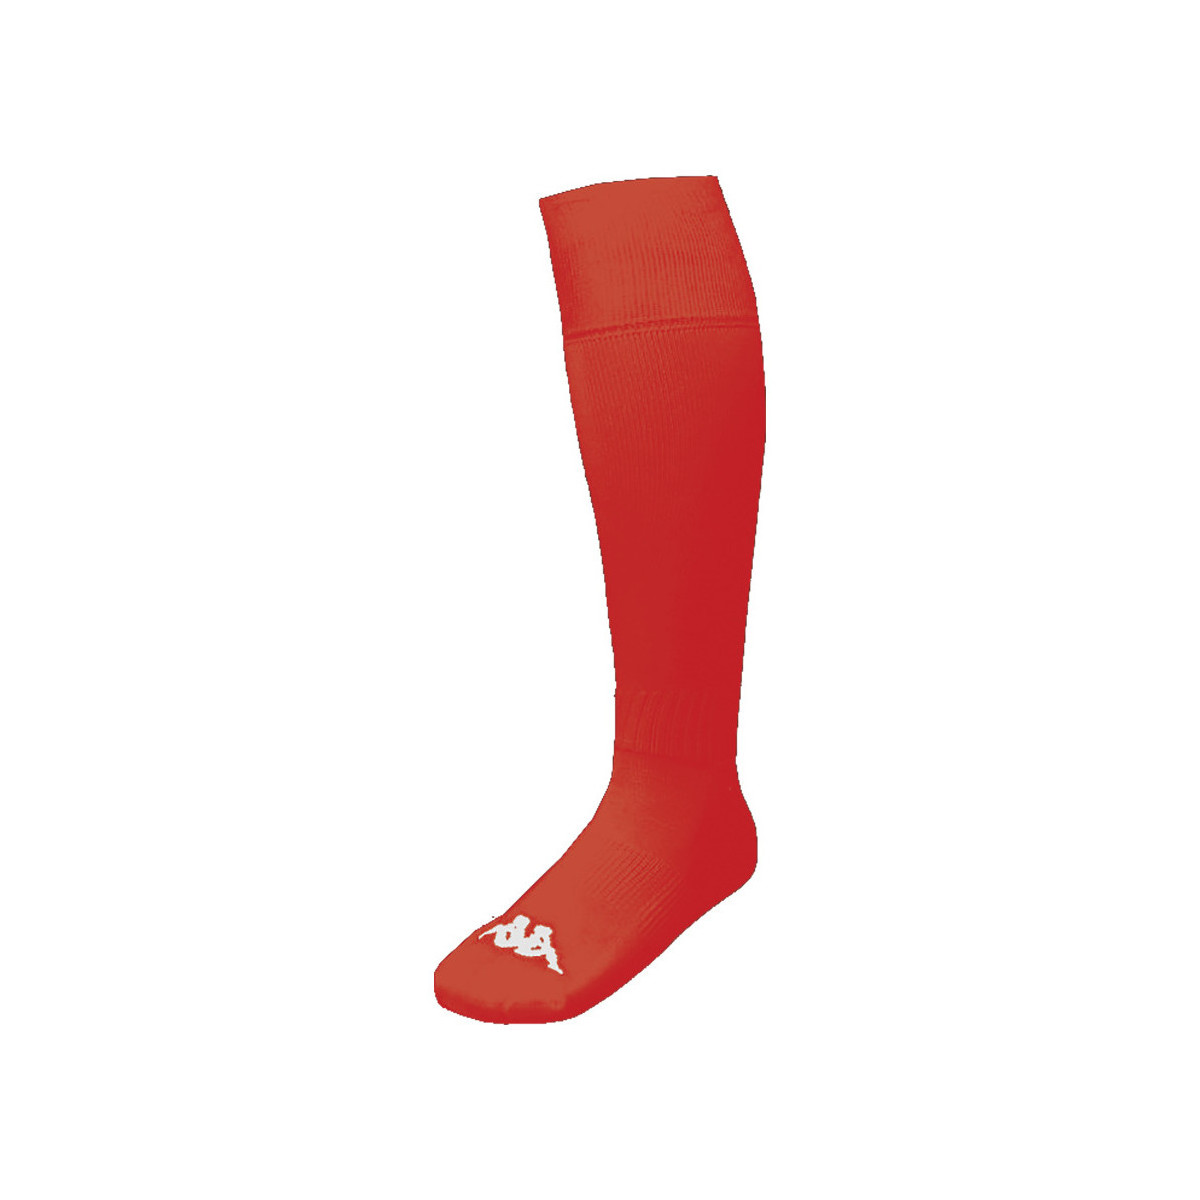 Kappa Rouge Chaussettes Lyna (3 paires) plfm106T